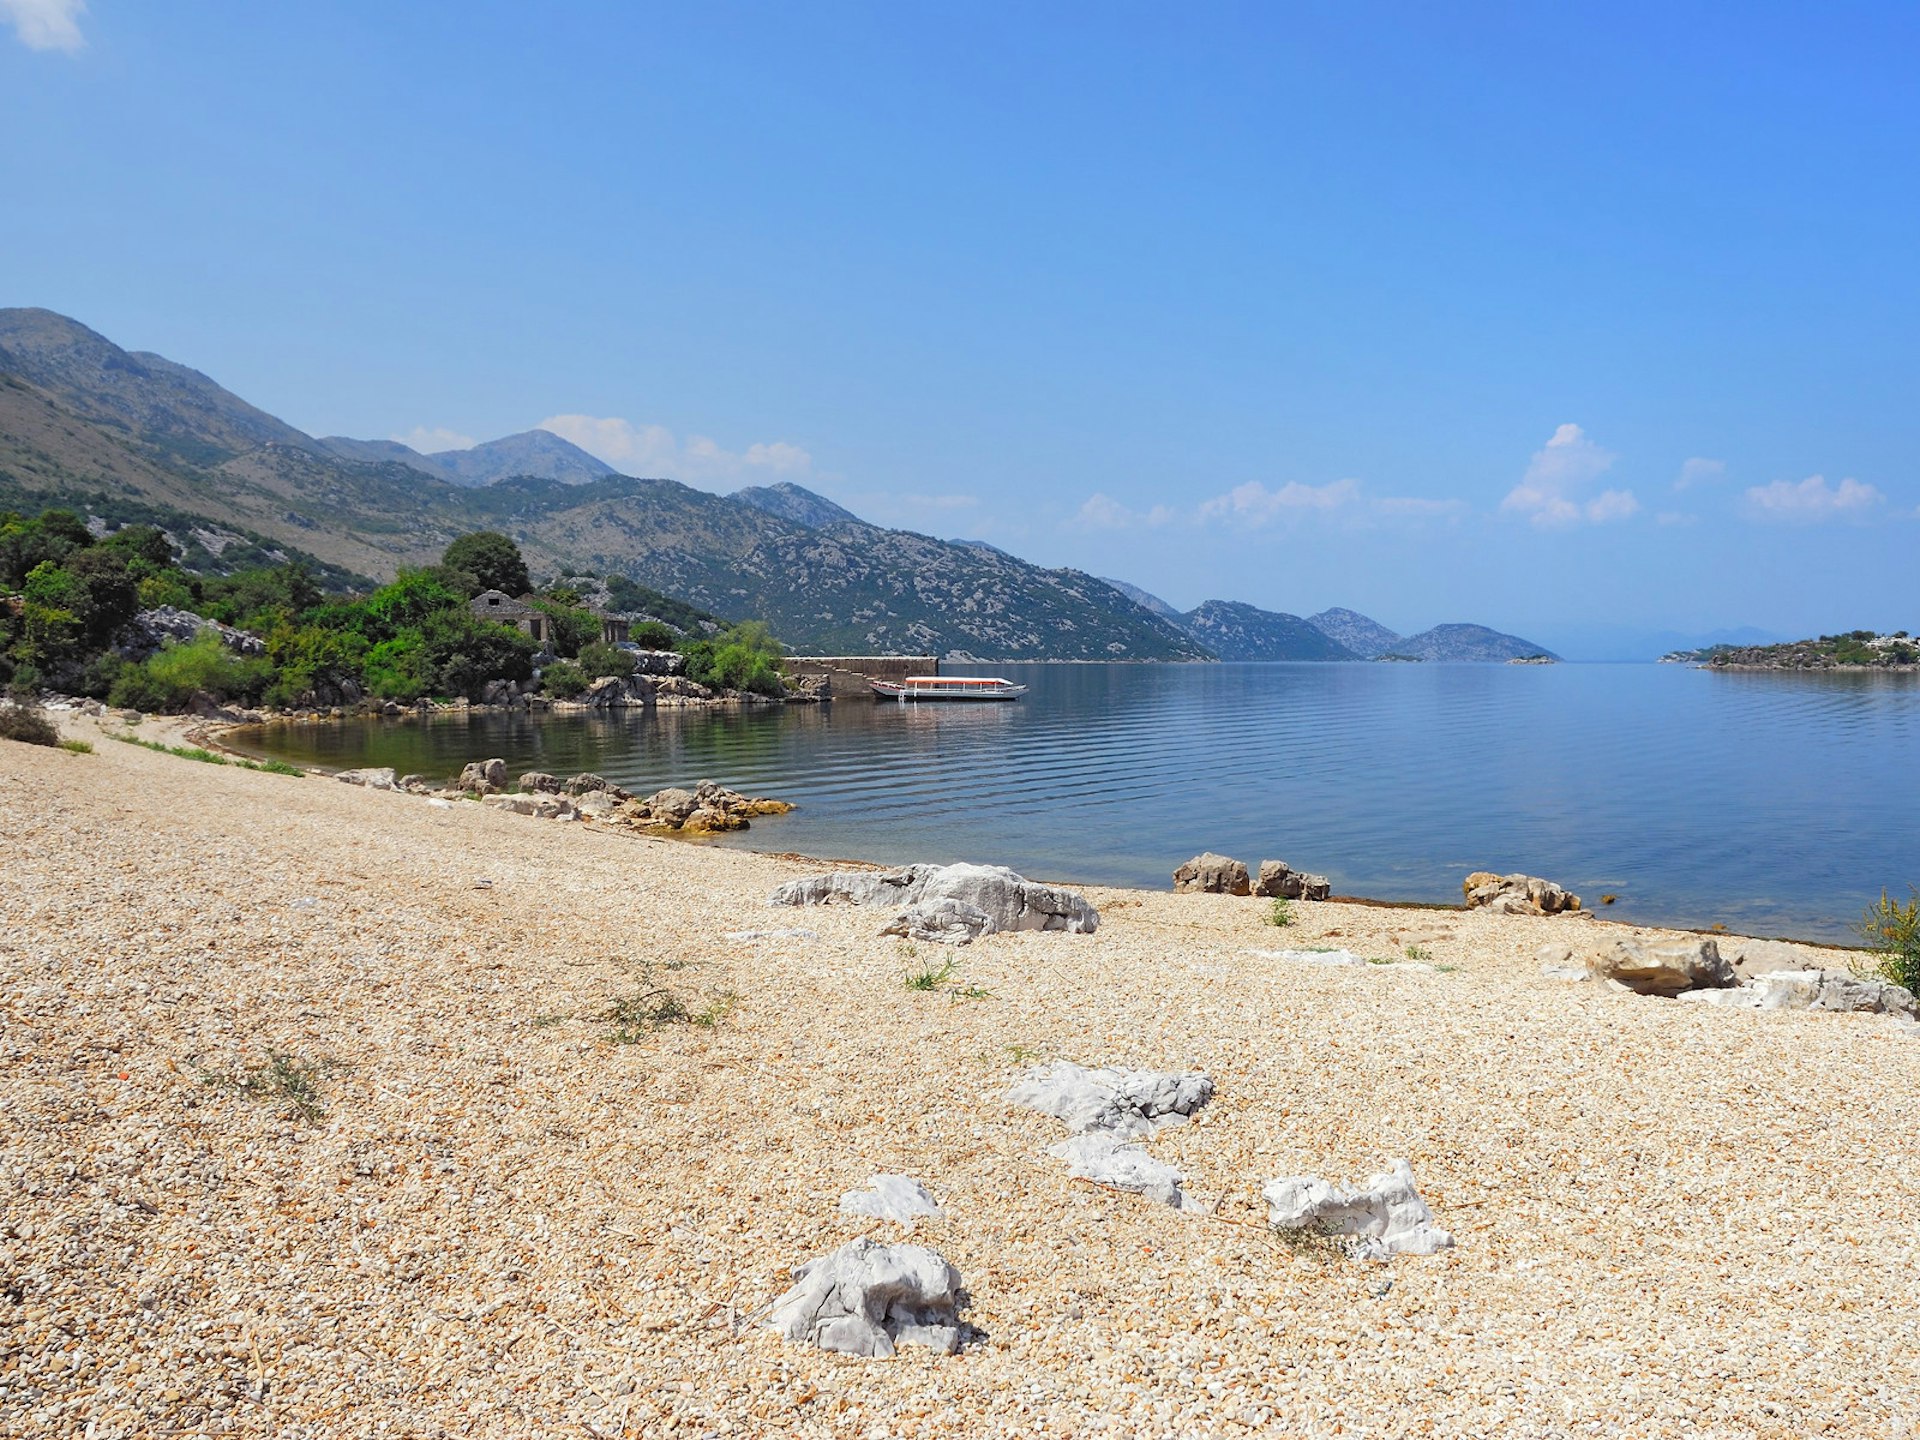 The quiet Murići beach is located on the shore of blissfully pretty Lake Skadar © znm / Getty Images